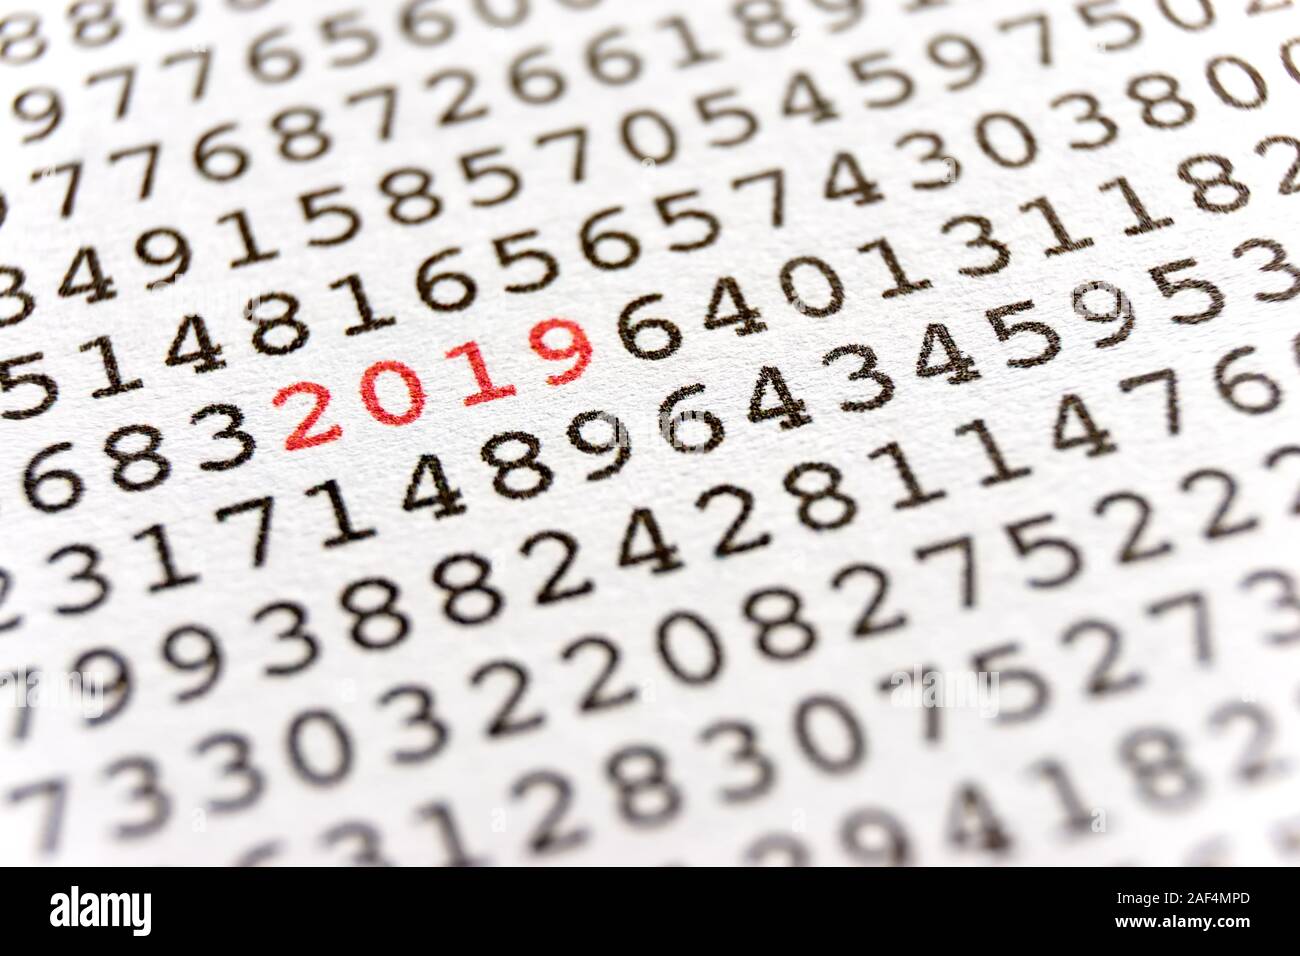 Background with black printed random numbers and the numbers 2019 in red for use as a template for a new year card or annual report. Stock Photo